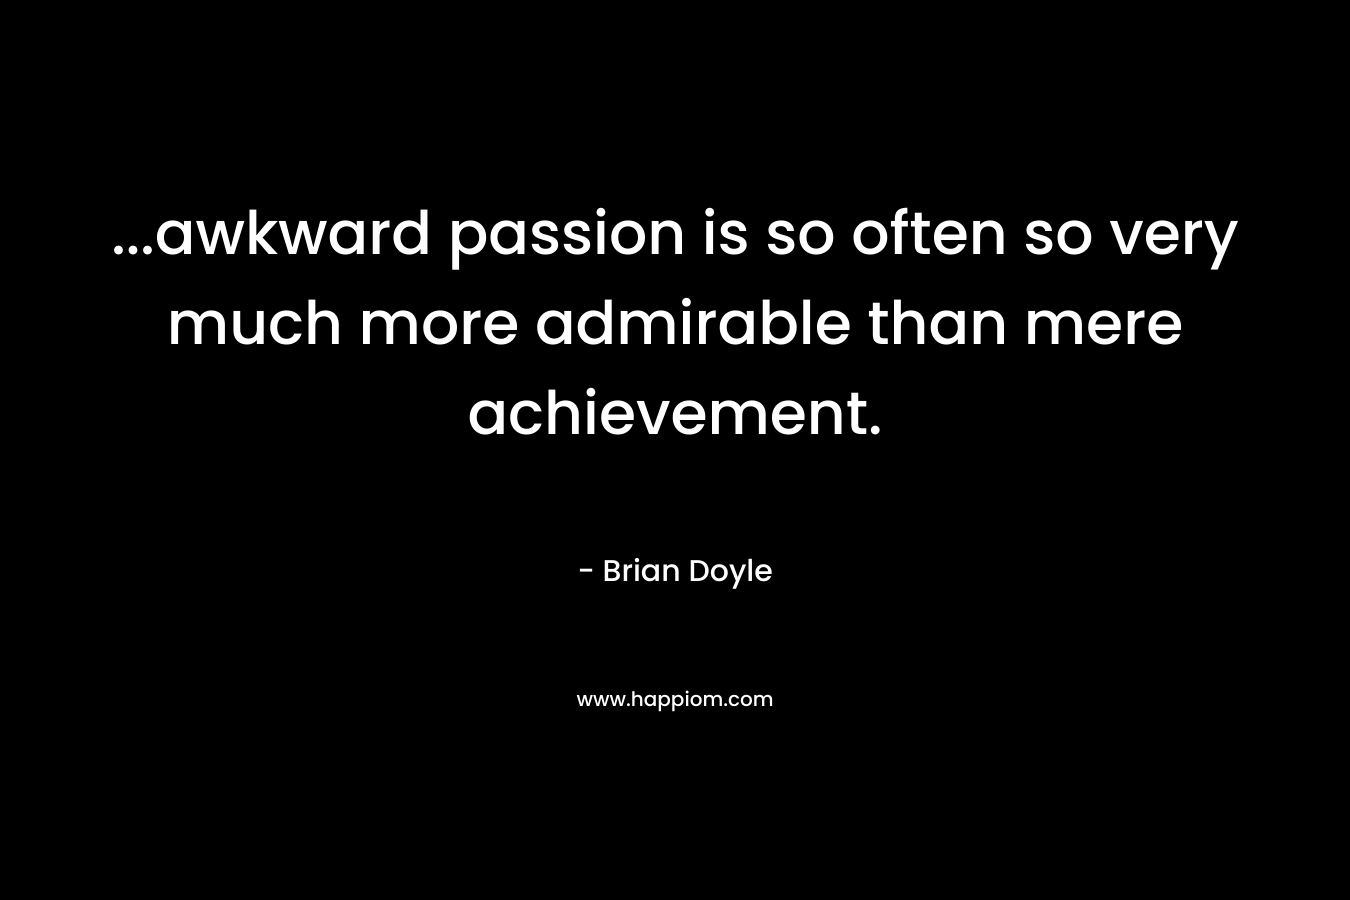 ...awkward passion is so often so very much more admirable than mere achievement.